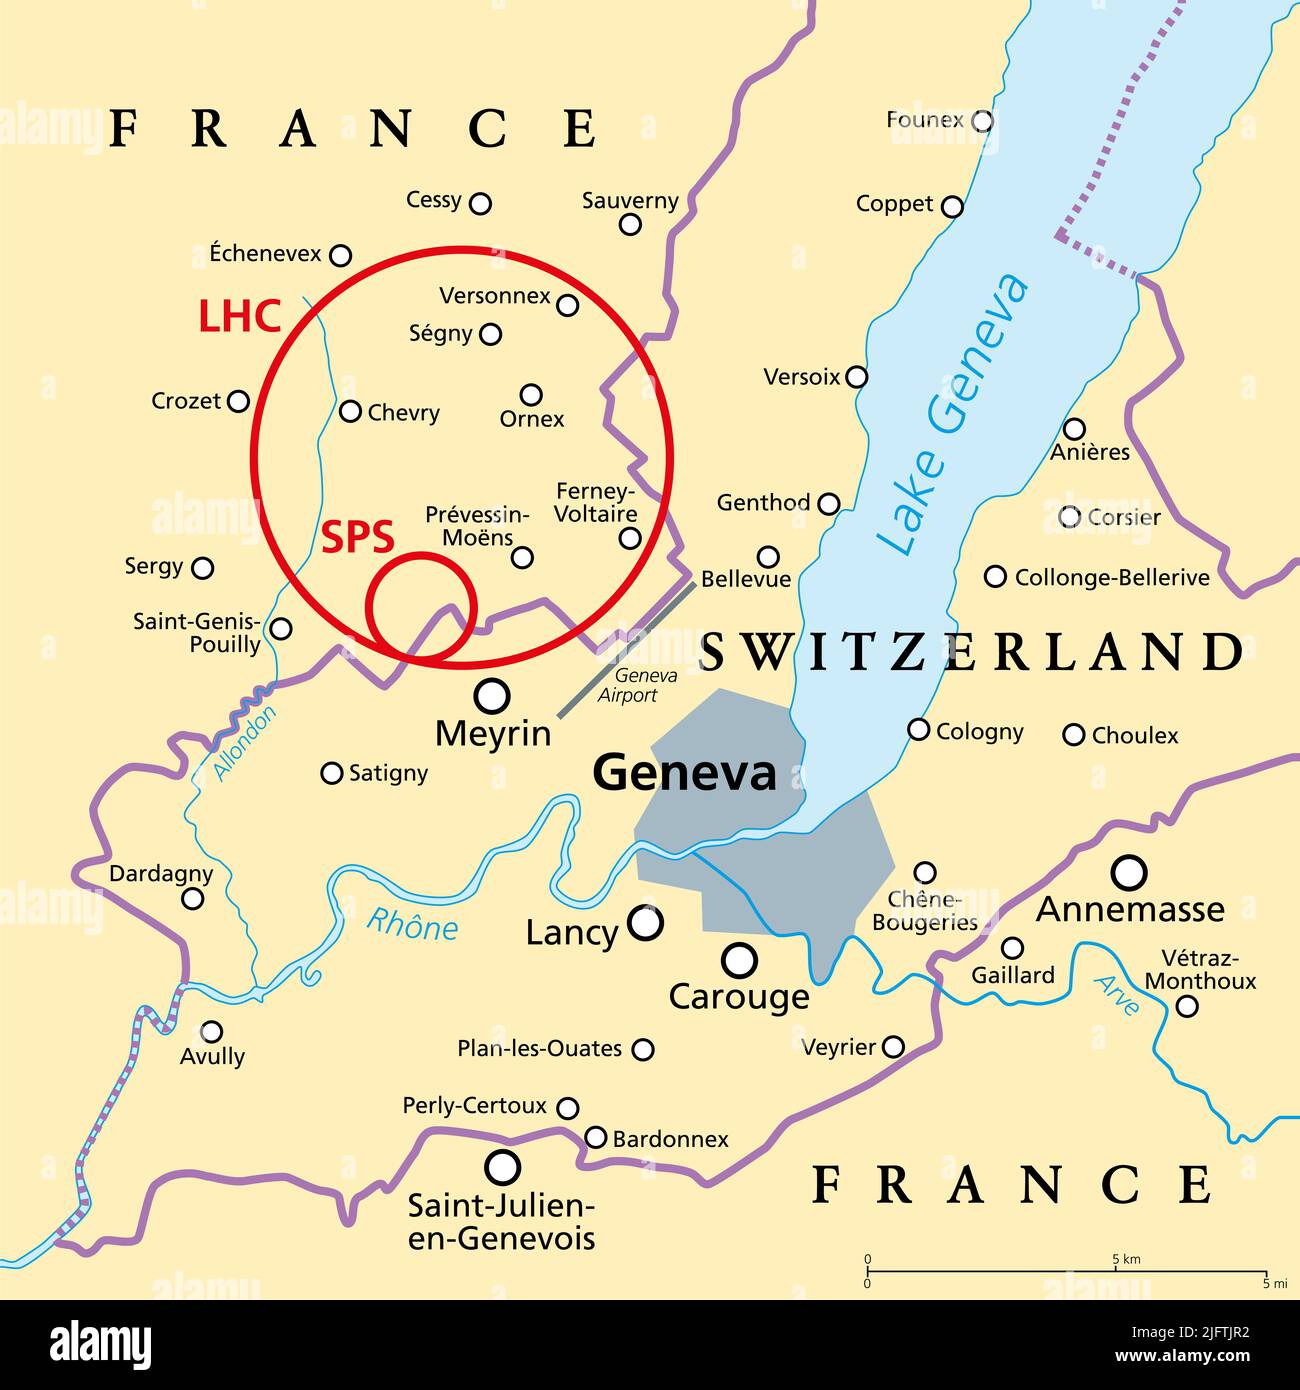 Large Hadron Collider (LHC) and Super Proton Synchrotron (SPS), political map. Worlds largest particle collider near Geneva, Switzerland. Stock Photo